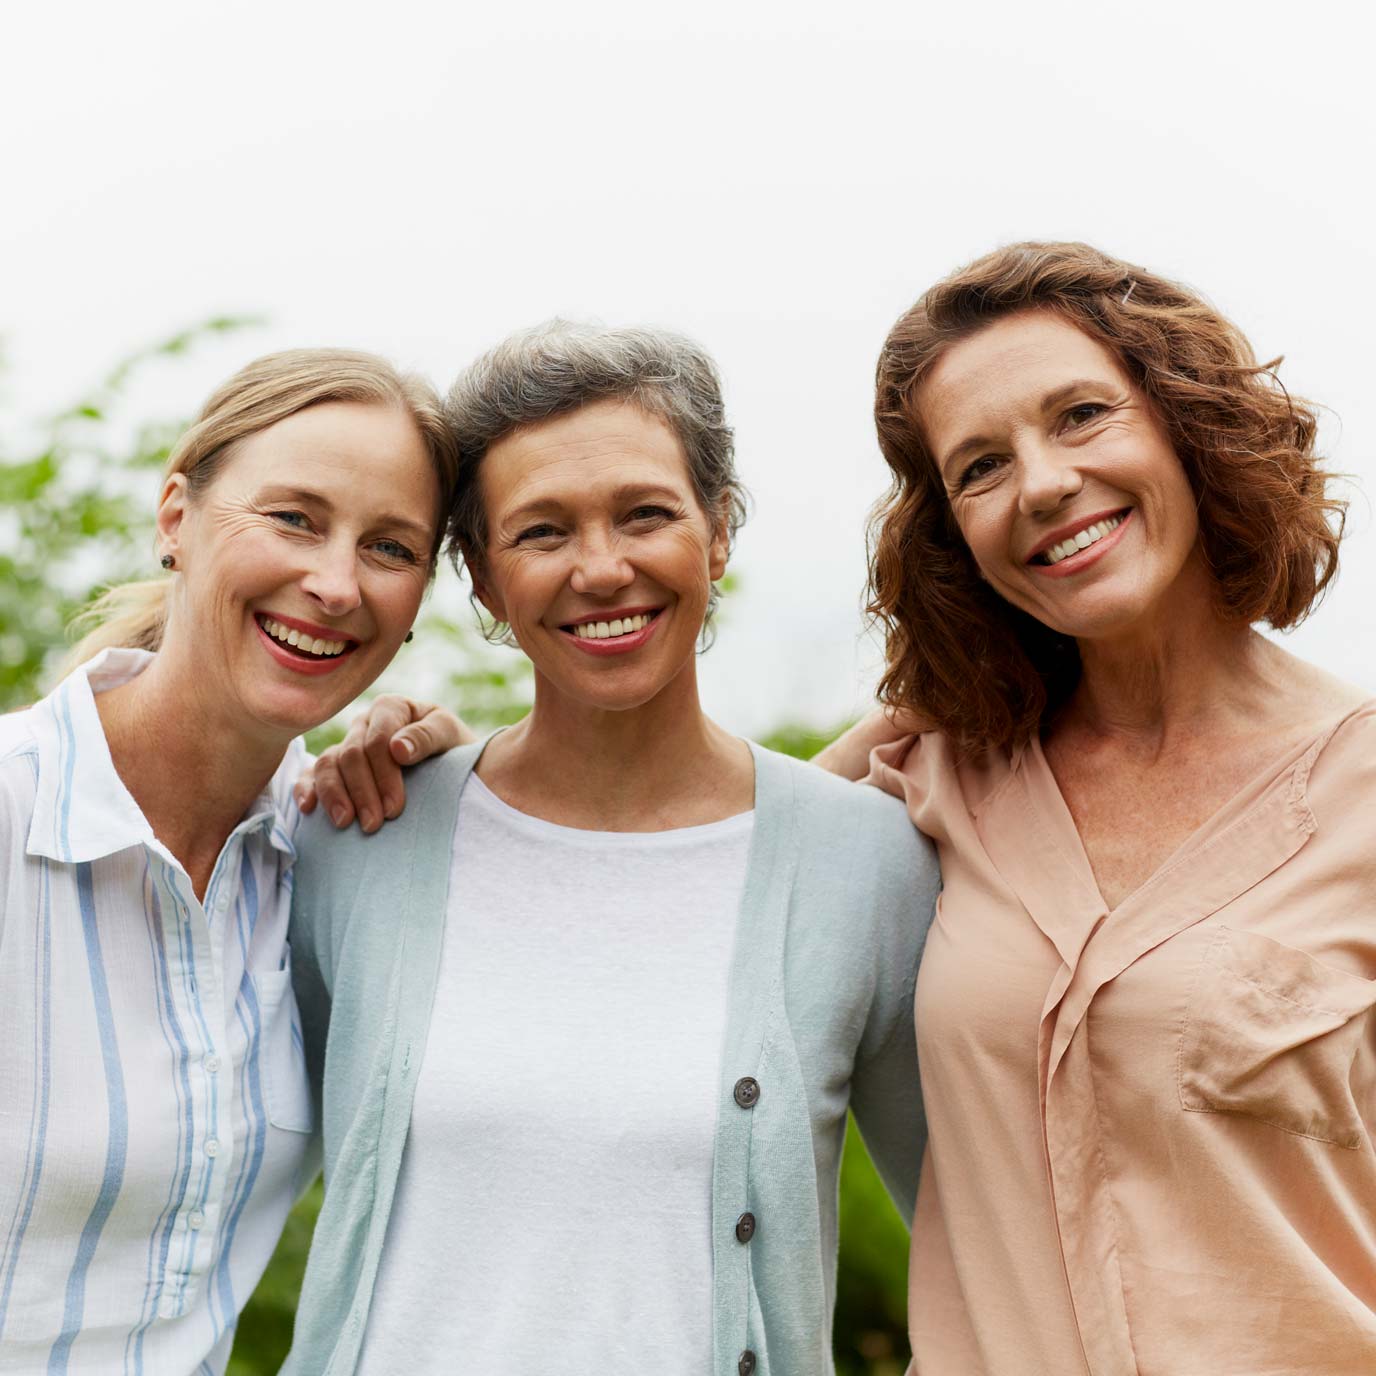 Read about the early signs of menopause and what you can do to improve your symptoms